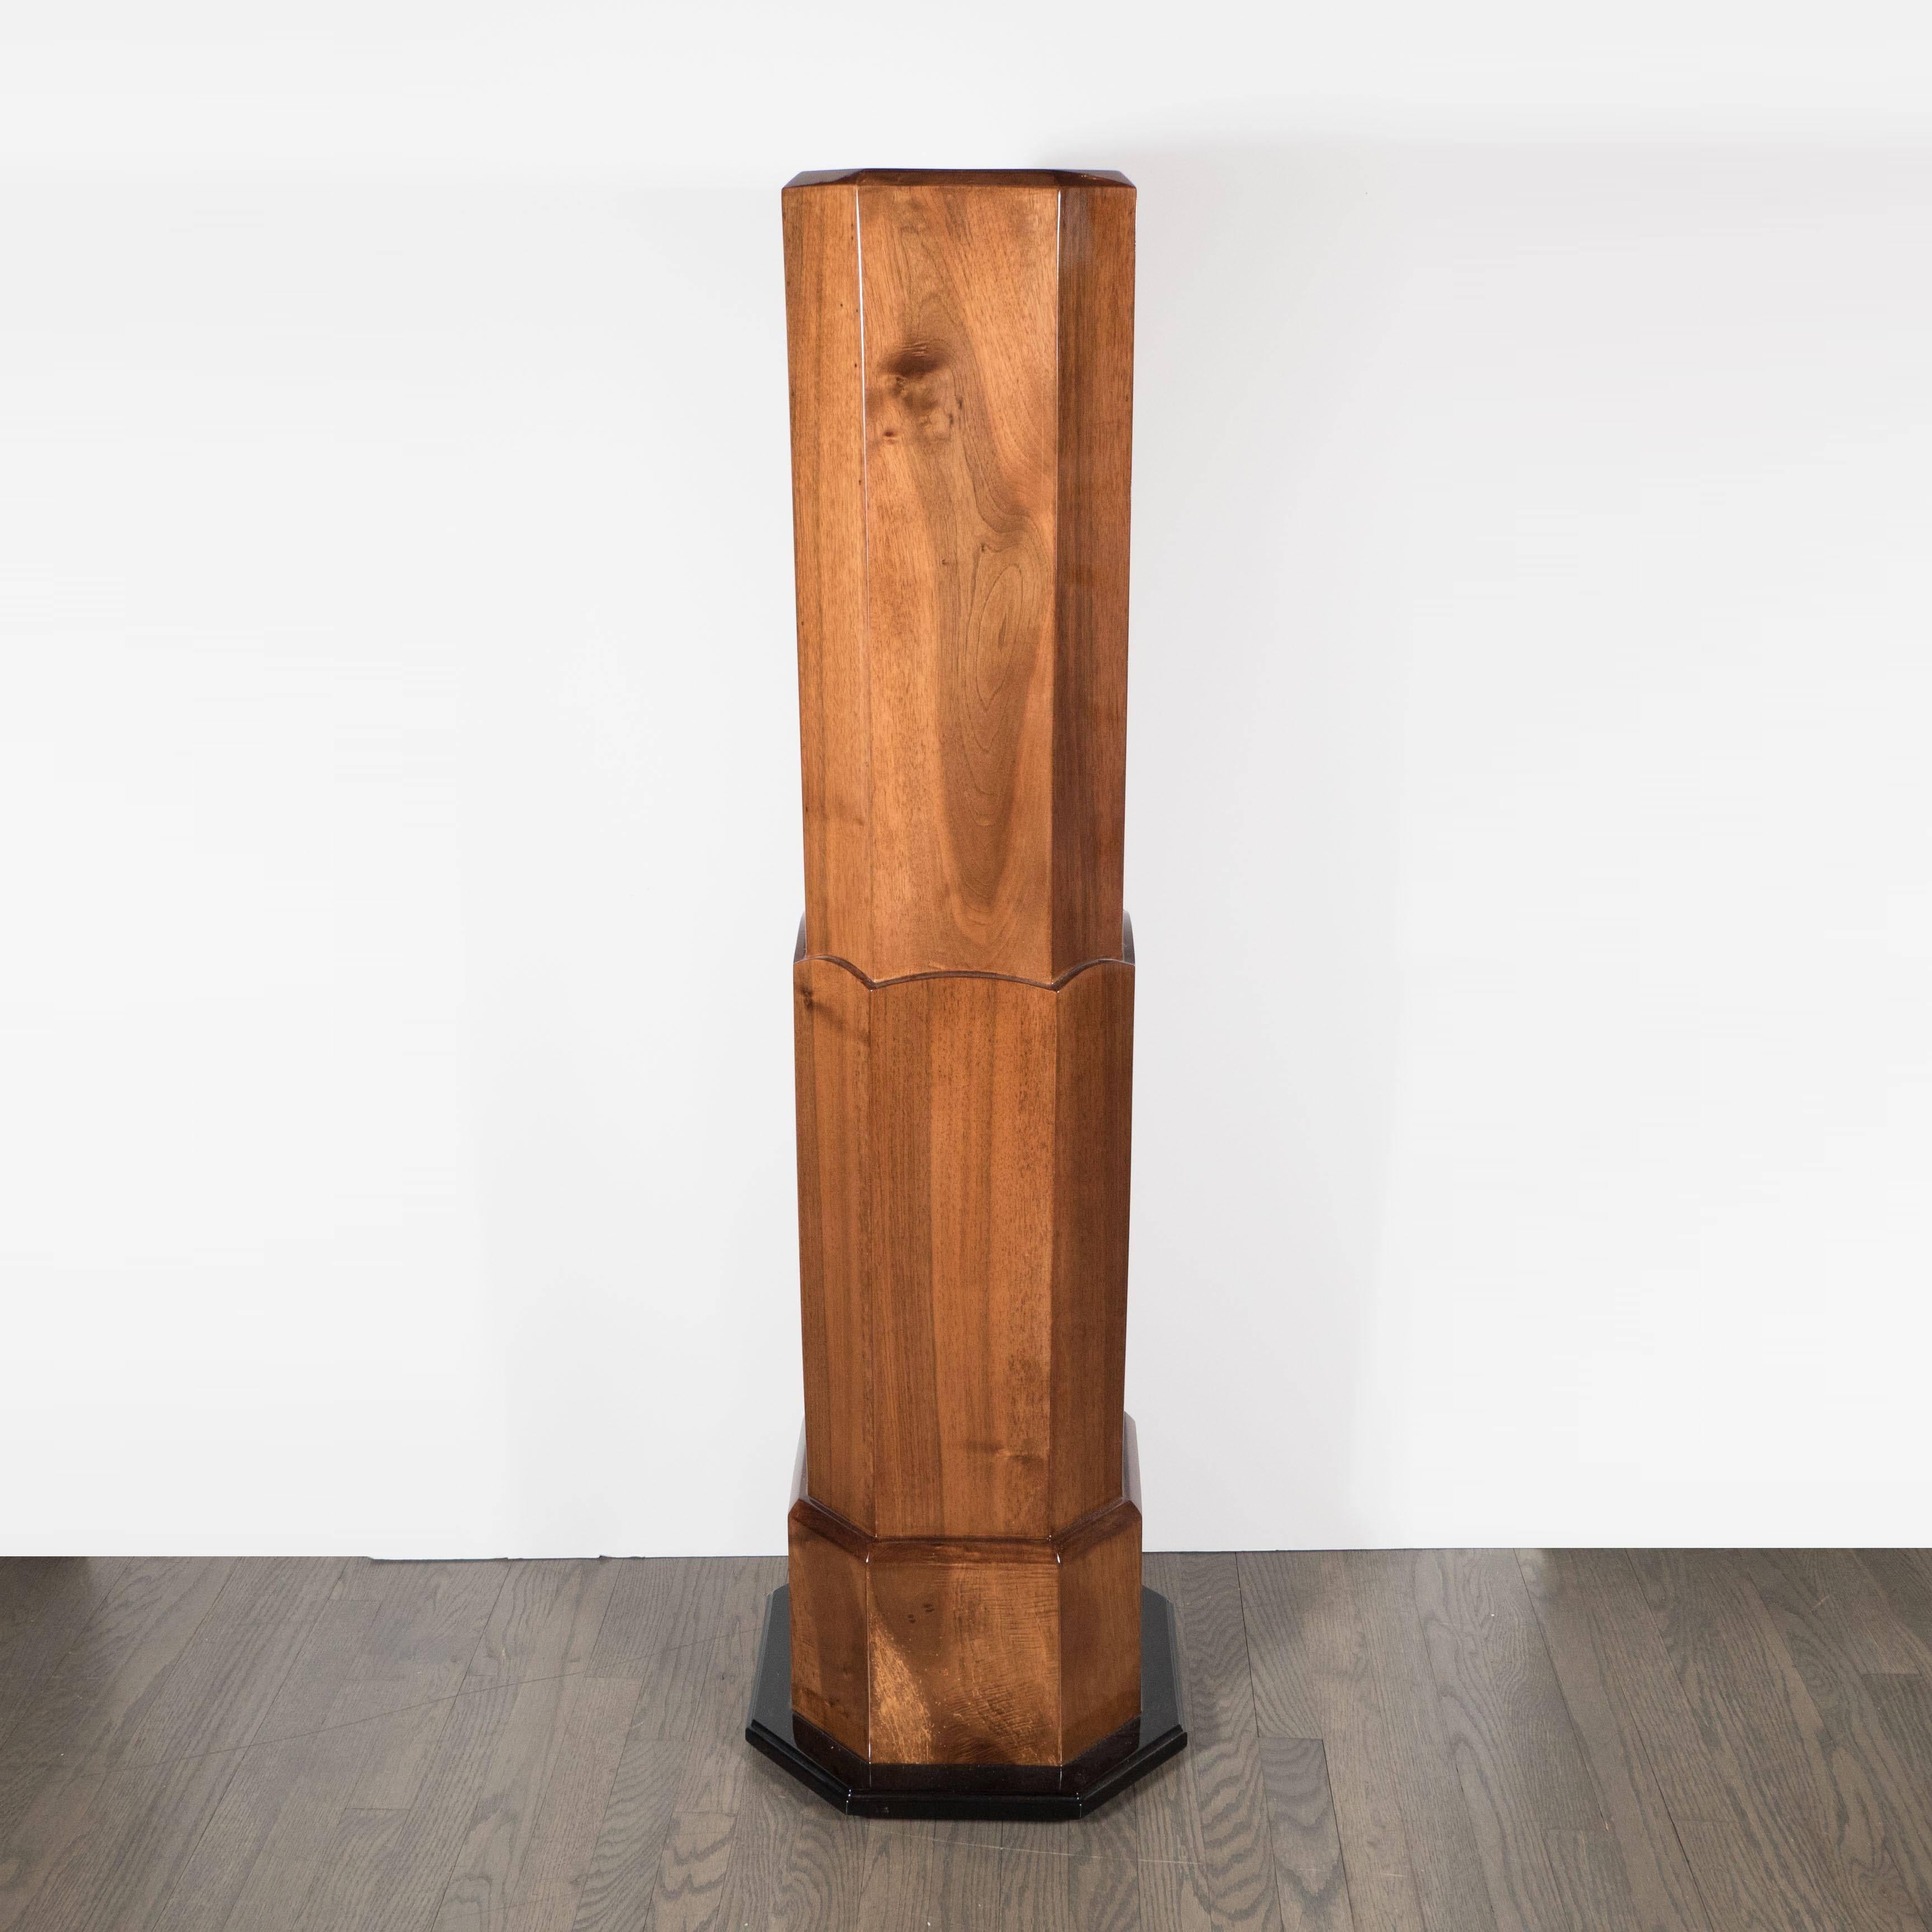 An Art Deco skyscraper-style pedestal in bookmatched walnut with black lacquer accents. A stepped design gives this octagonal pedestal a statuesque disposition. A ebonized and lacquered base supports the piece, with beveled and scalloped detailing